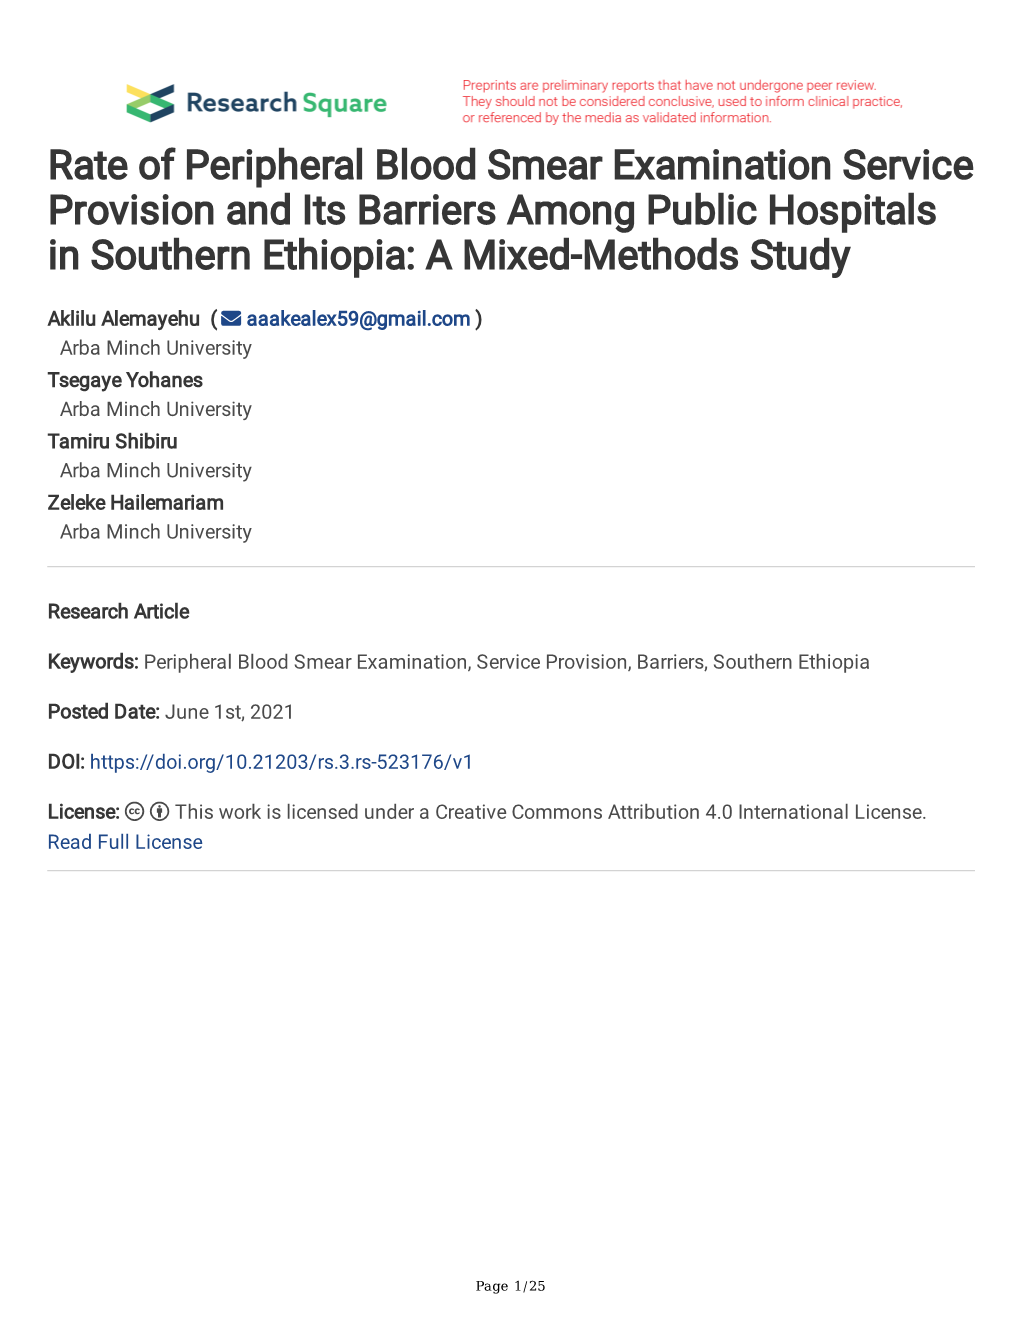 Rate of Peripheral Blood Smear Examination Service Provision and Its Barriers Among Public Hospitals in Southern Ethiopia: a Mixed-Methods Study